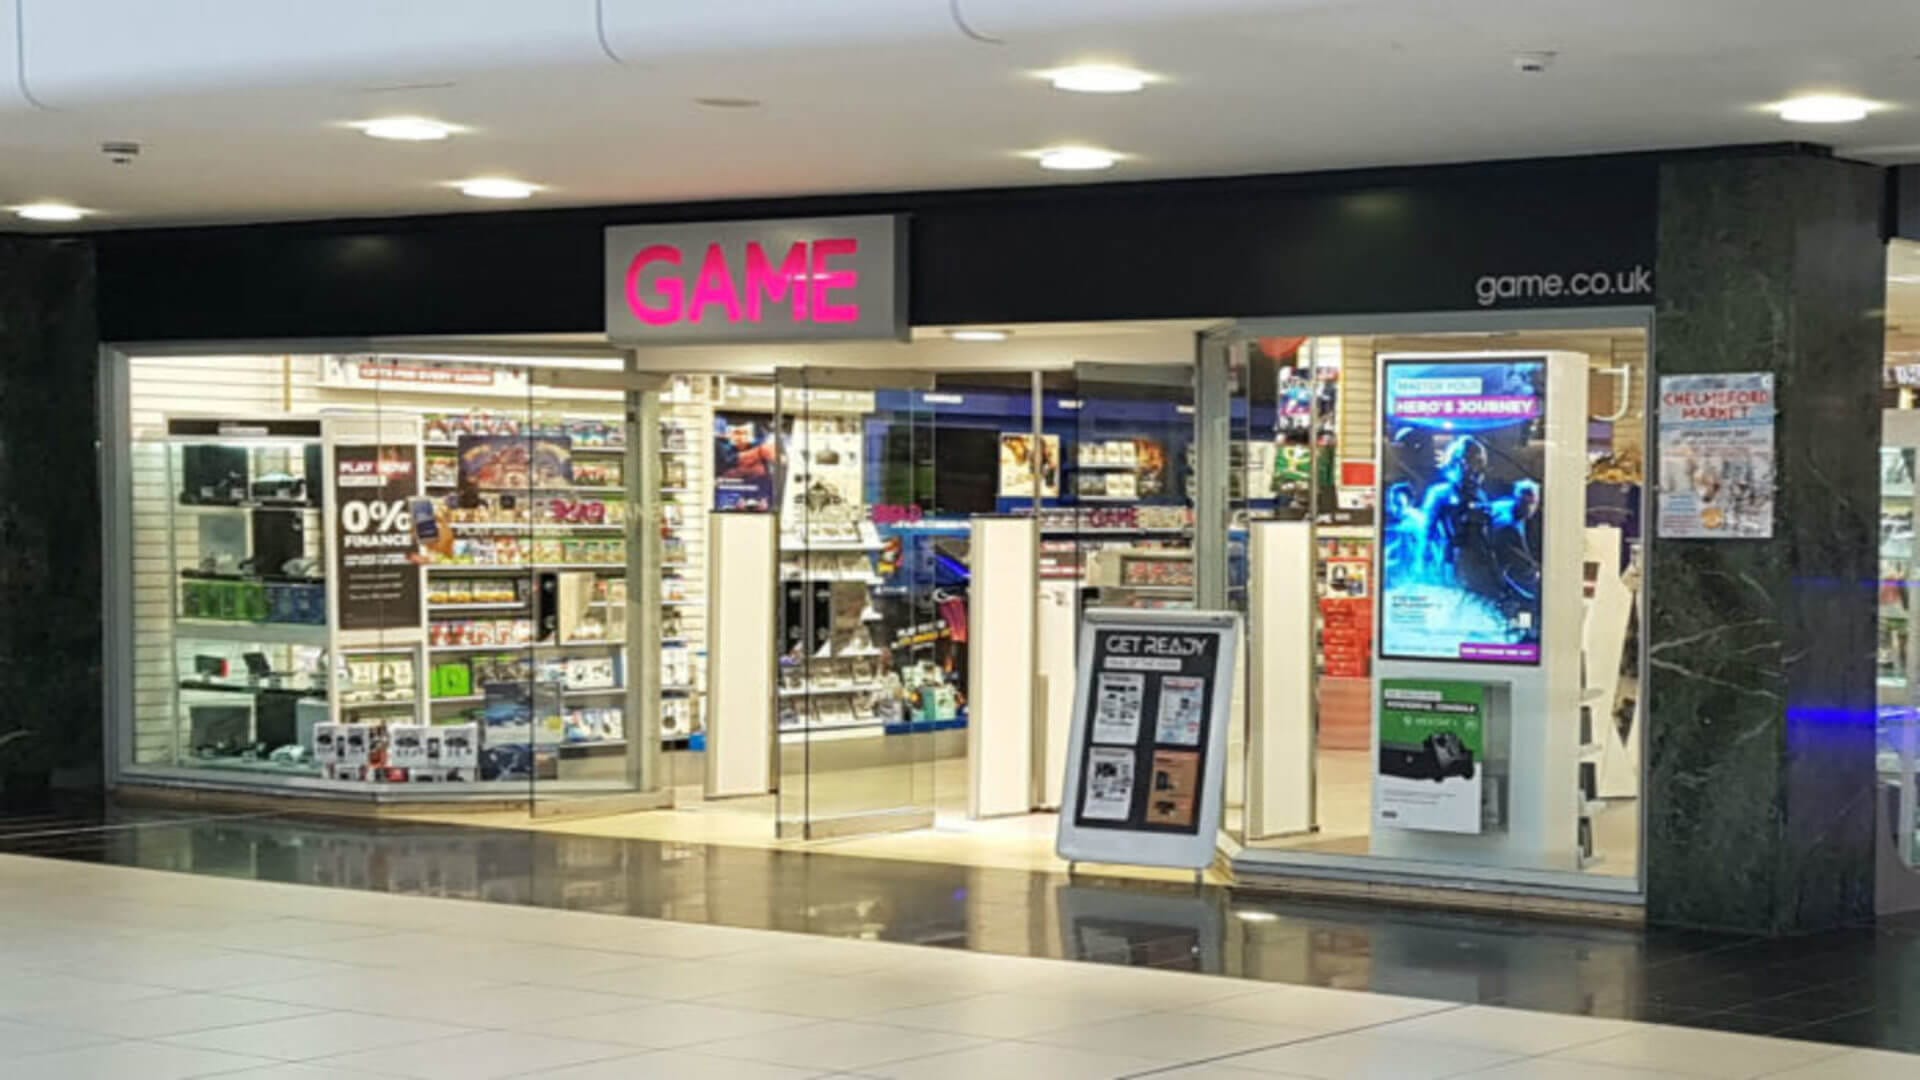 A storefront for GAME, the retailer soon to be selling GameStop-themed shirts.